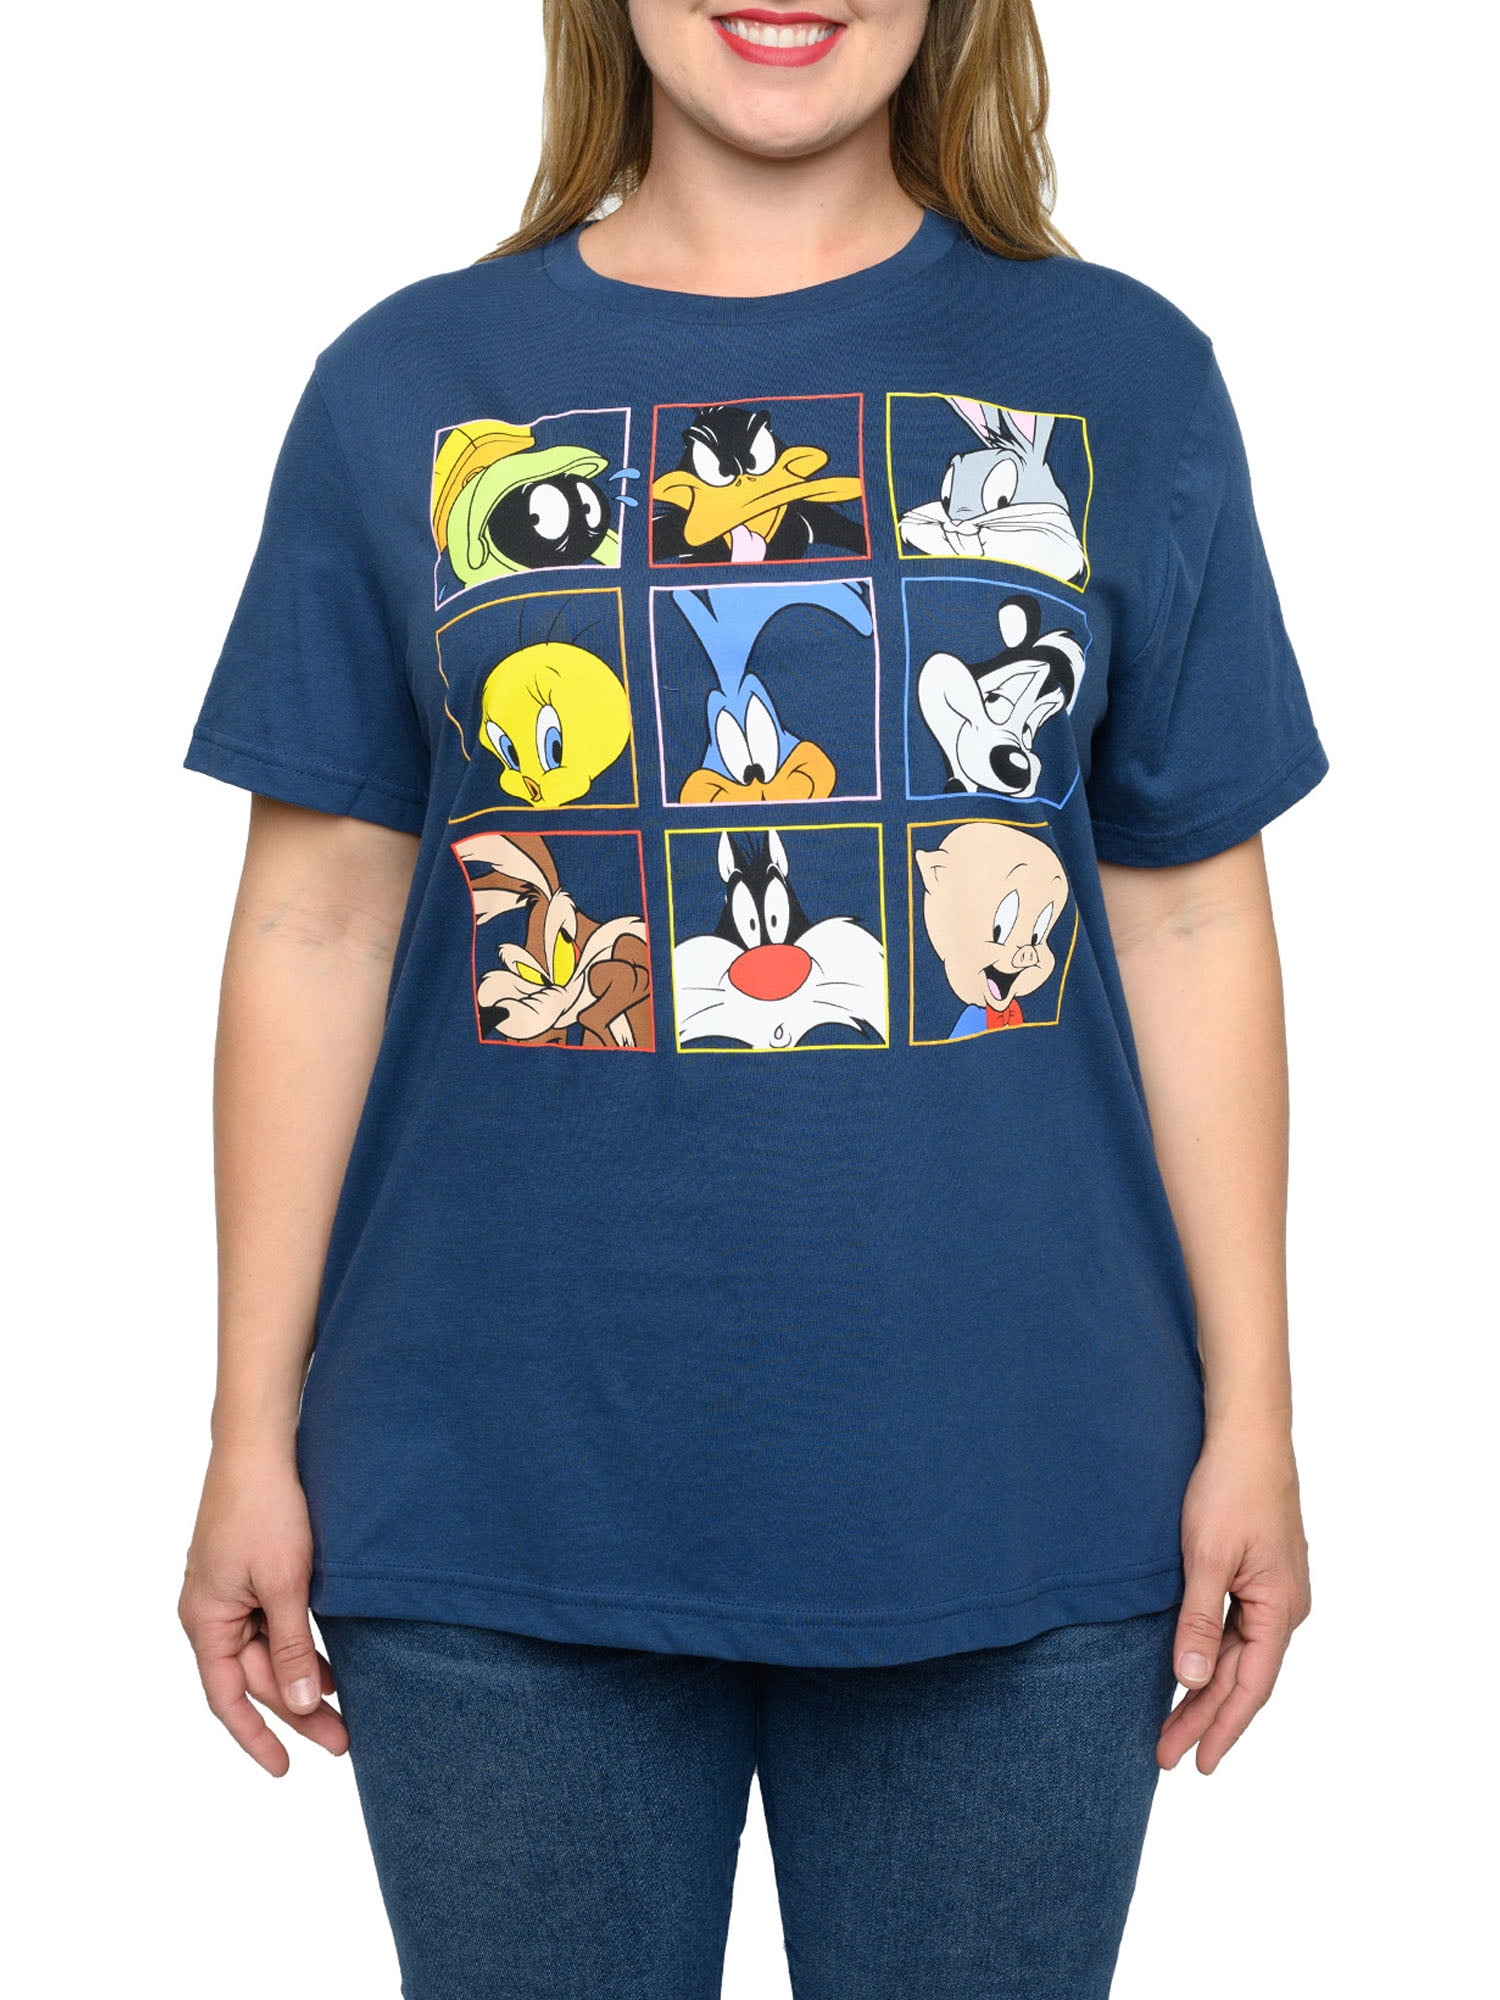 Women\'s Looney Tunes T-Shirt Plus Size Bugs Bunny Blue Daffy Sylvester  Tweety